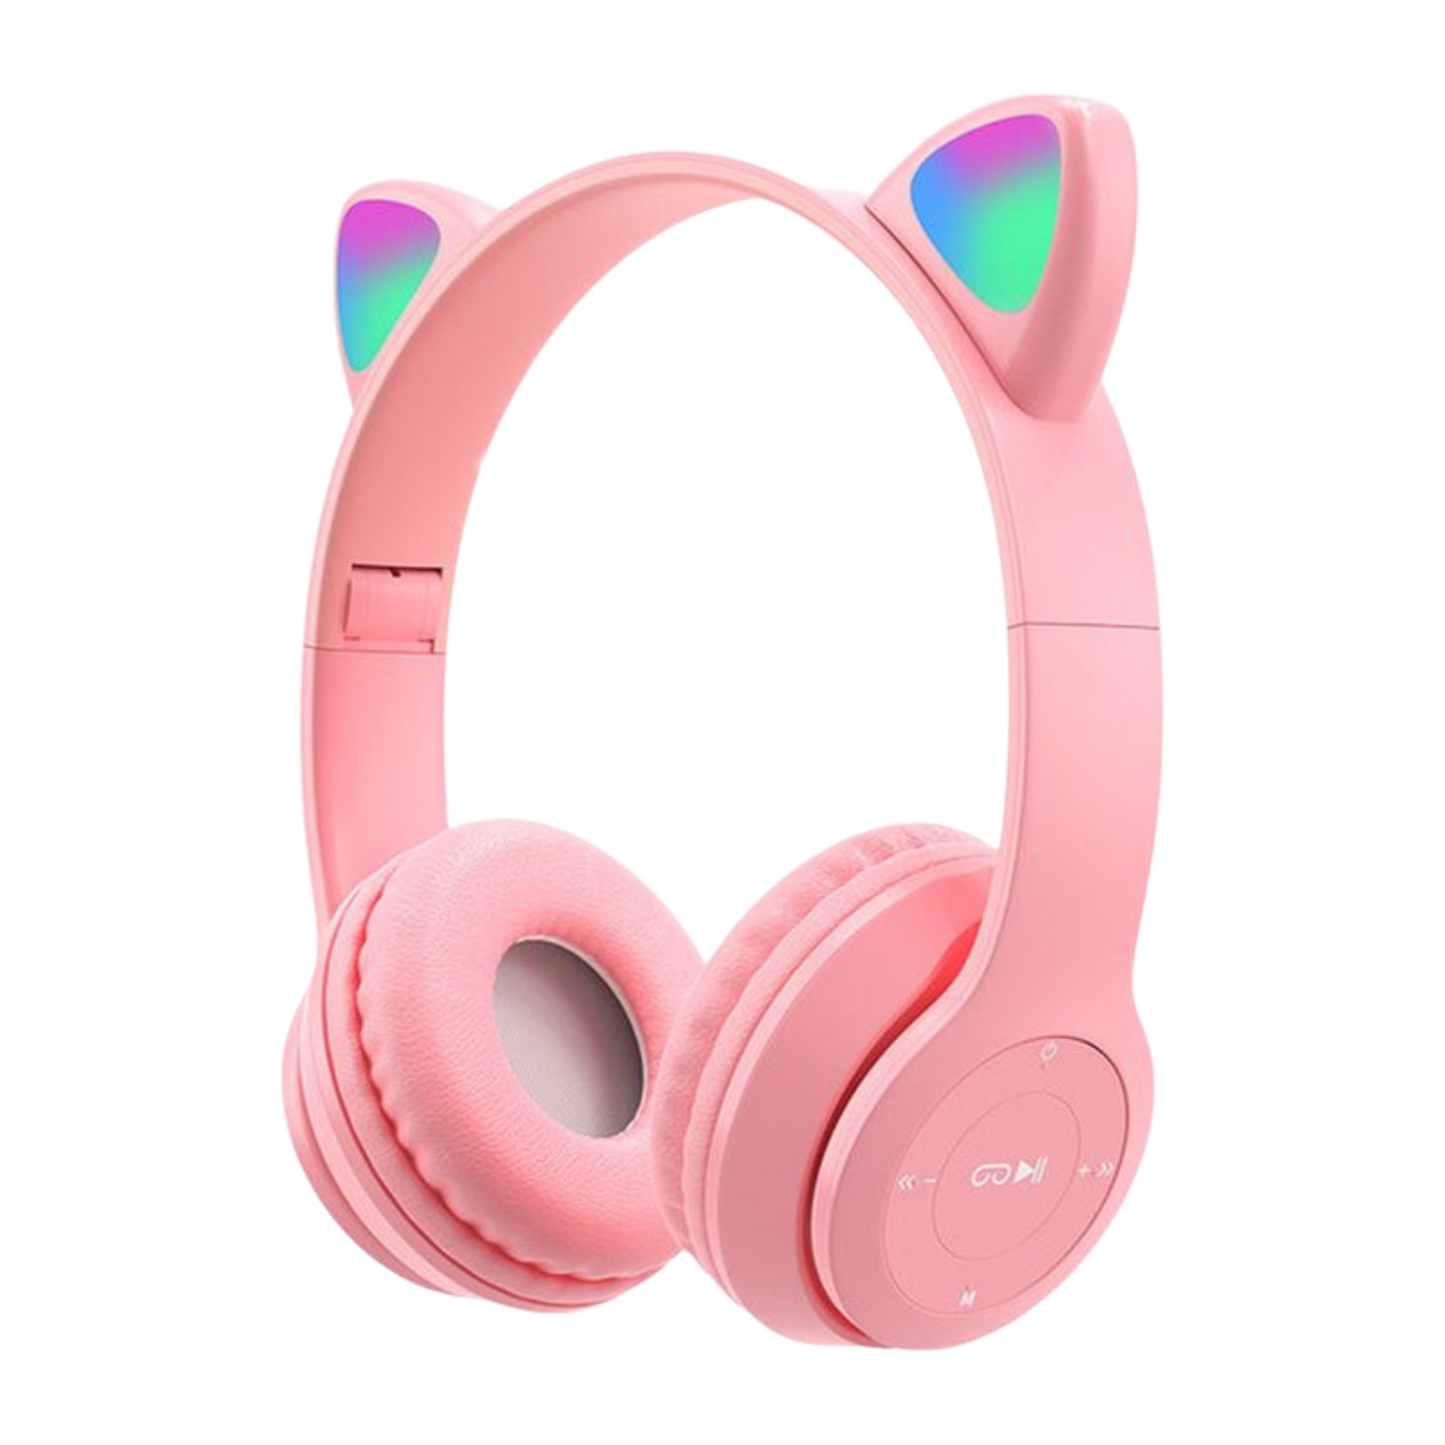 Wireless Headphones Cat Ear with Mic Blue-Tooth Glow Light Stereo Bass Helmets Children Gamer Girl Gifts PC Phone Gaming Headset